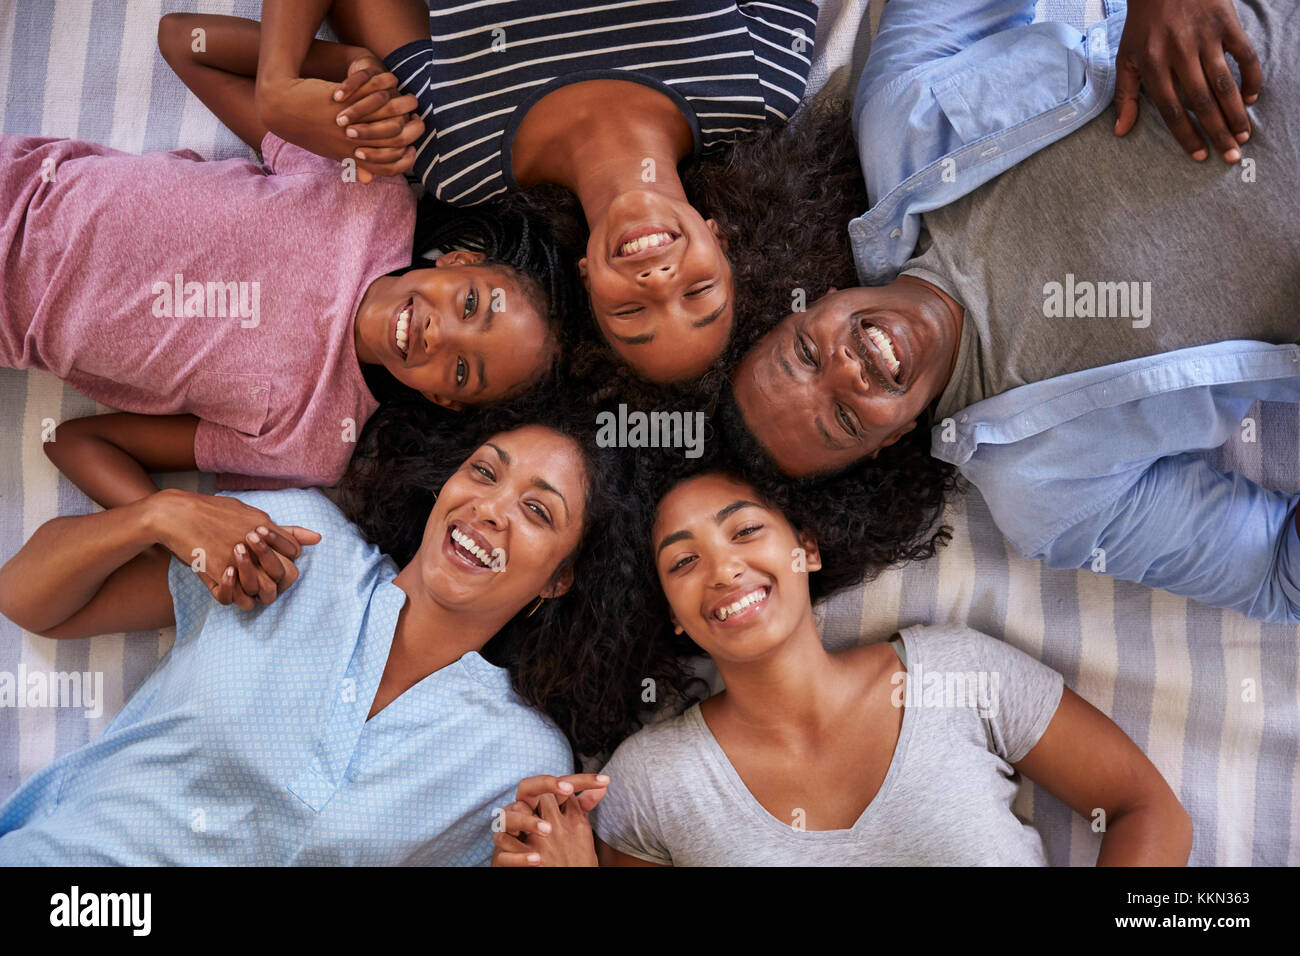 Overhead View Of Family With Teenage Children Lying On Bed Stock Photo